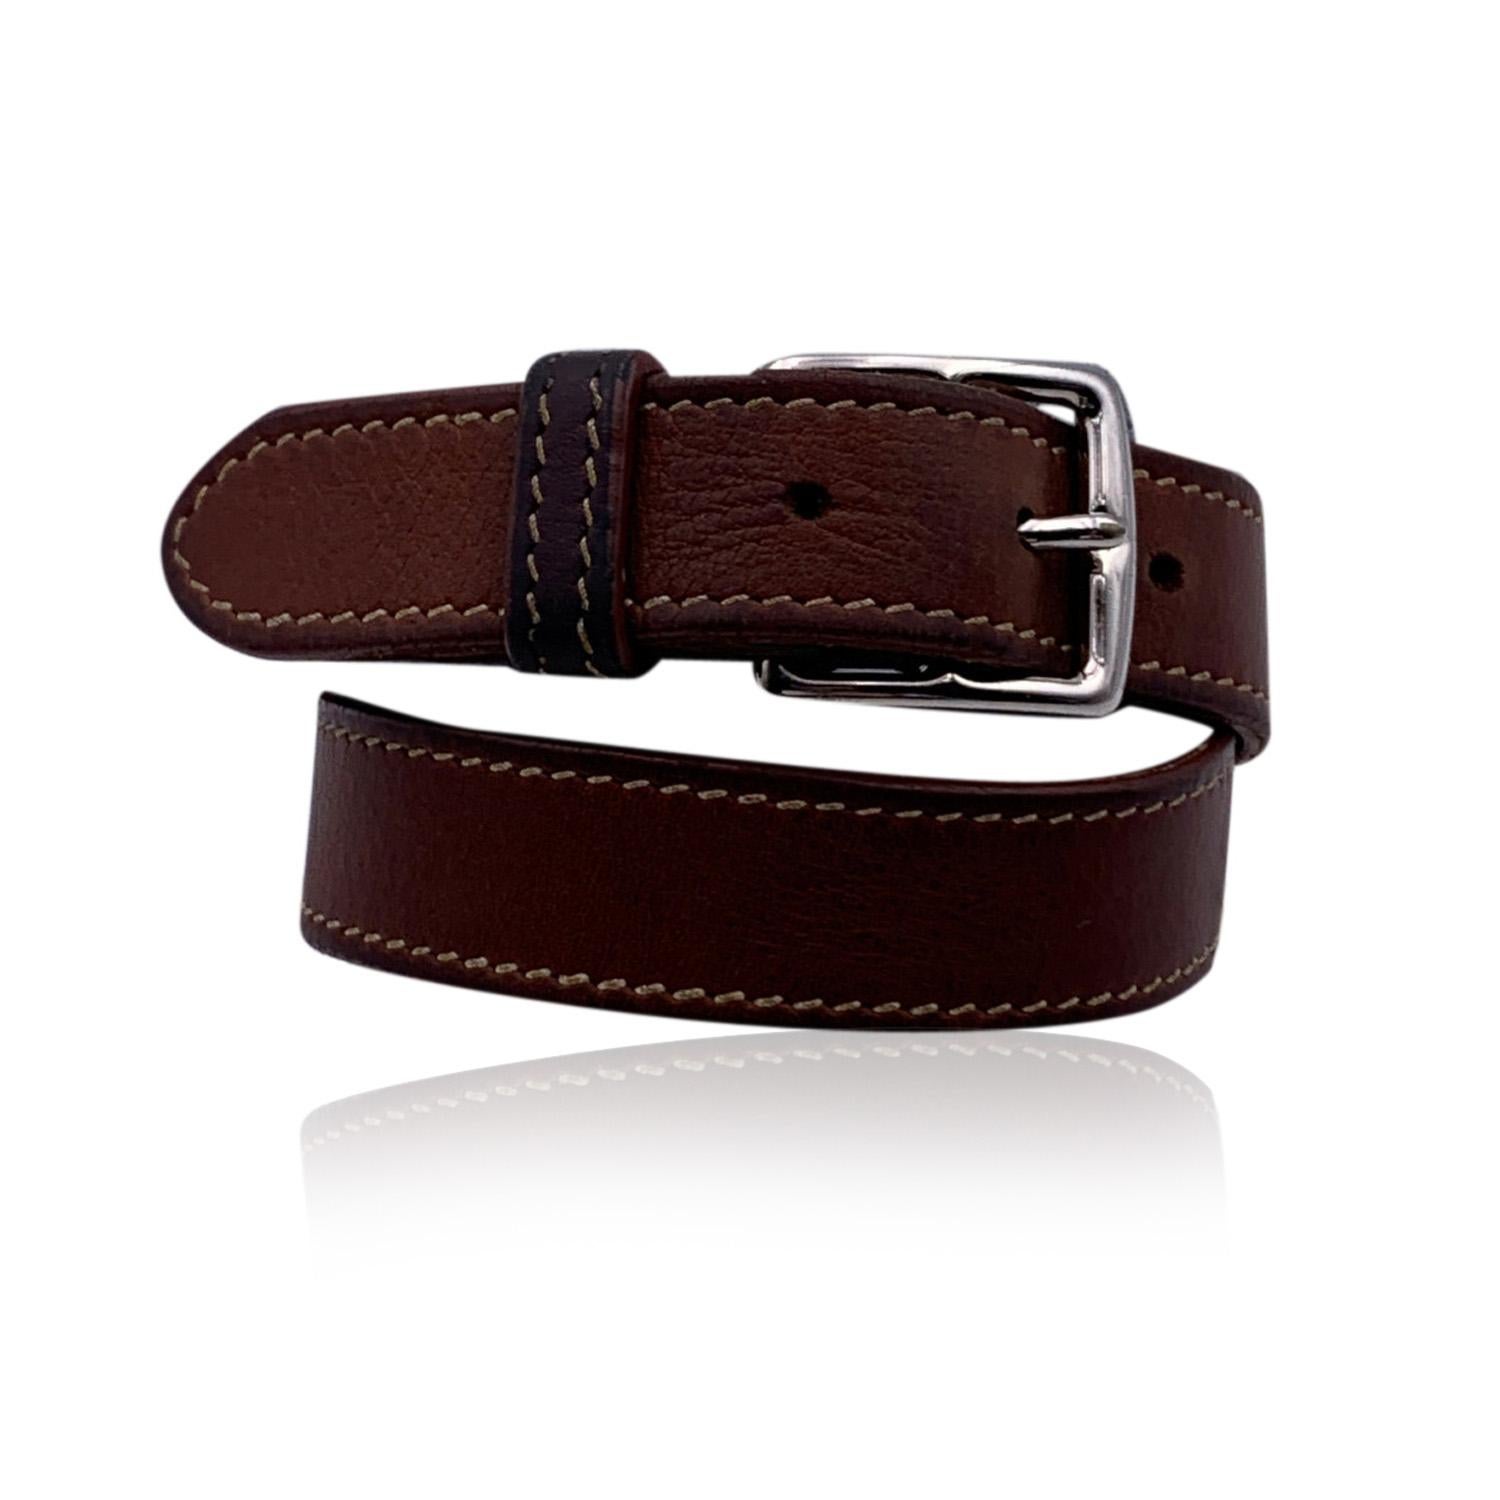 Hermes leather adjustable Etriviere bracelet in brown color. Palladium buckle. 3 holes adjustment. For wrists up to 7 inches - 17.8 in circumference. Total length of the strap: 17.5 inches - 44.5 cm. Signed 'Hermes Paris - Made in France' on the